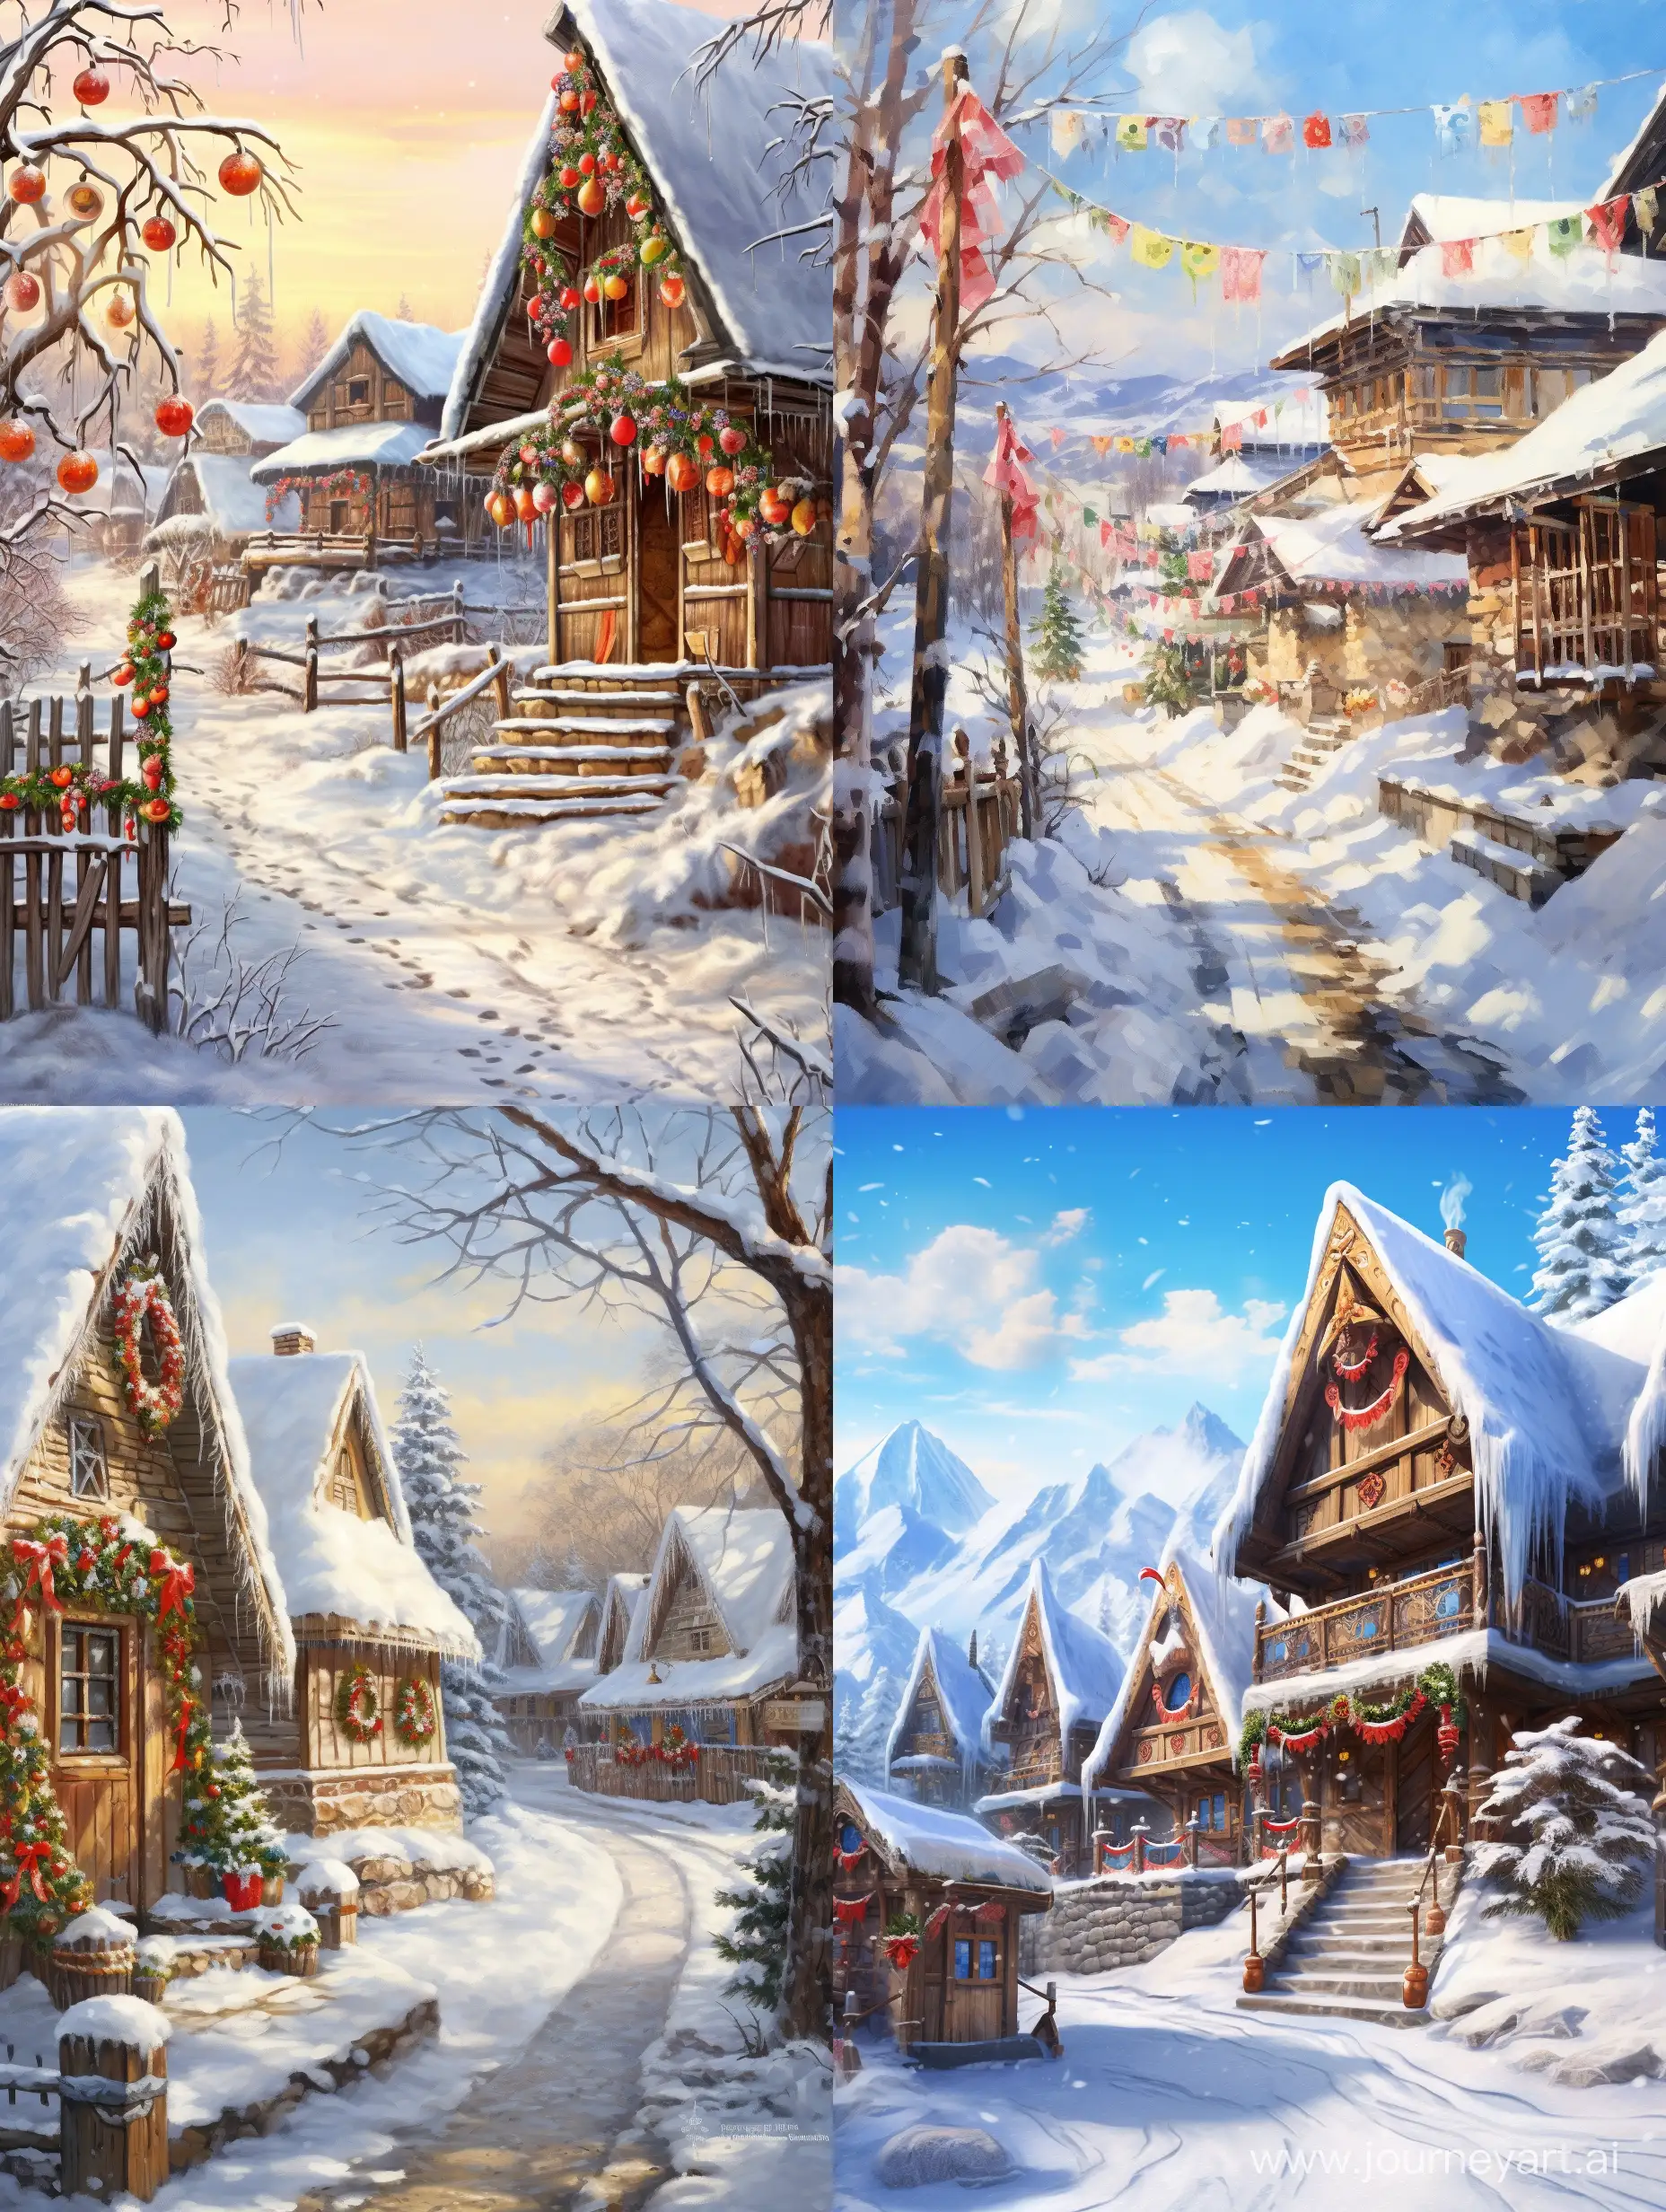 Charming-Ancient-New-Year-Village-with-Snowy-Decor-and-Sunny-Delight